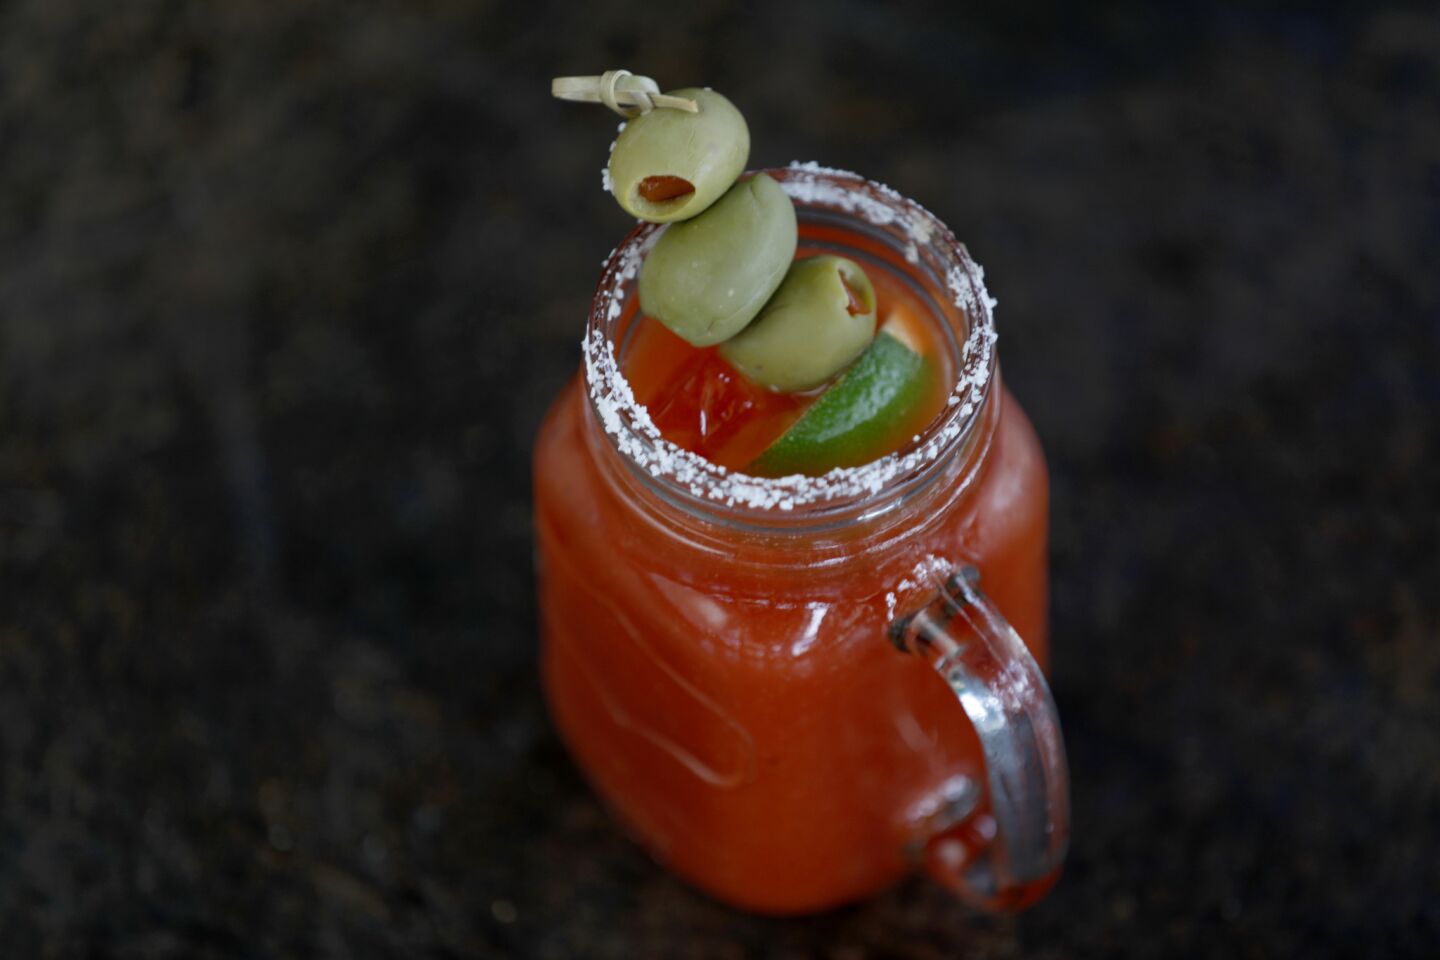 A little something for parents to indulge in, responsibly, of course: the Bloody Mary at Mike & Anne's in South Pasadena.